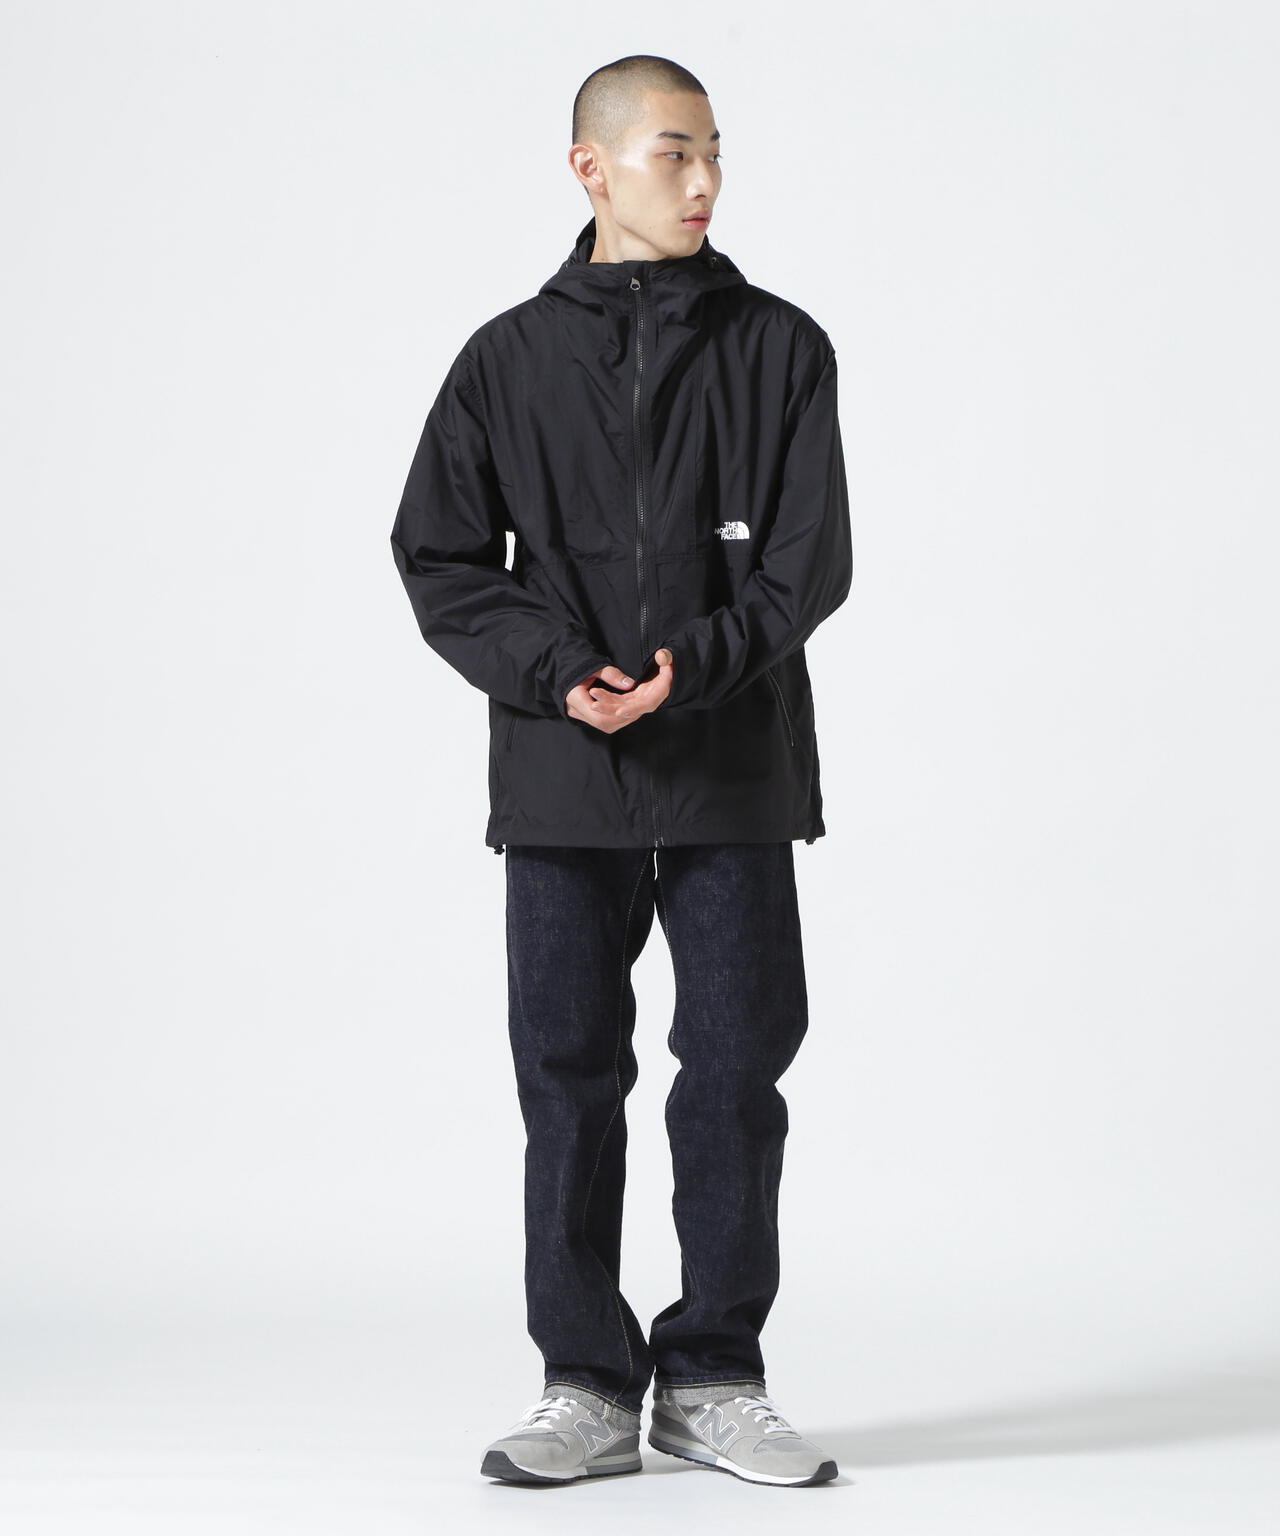 THE NORTH FACE/ザ・ノースフェイス/Compact Jacket/コンパクト ...